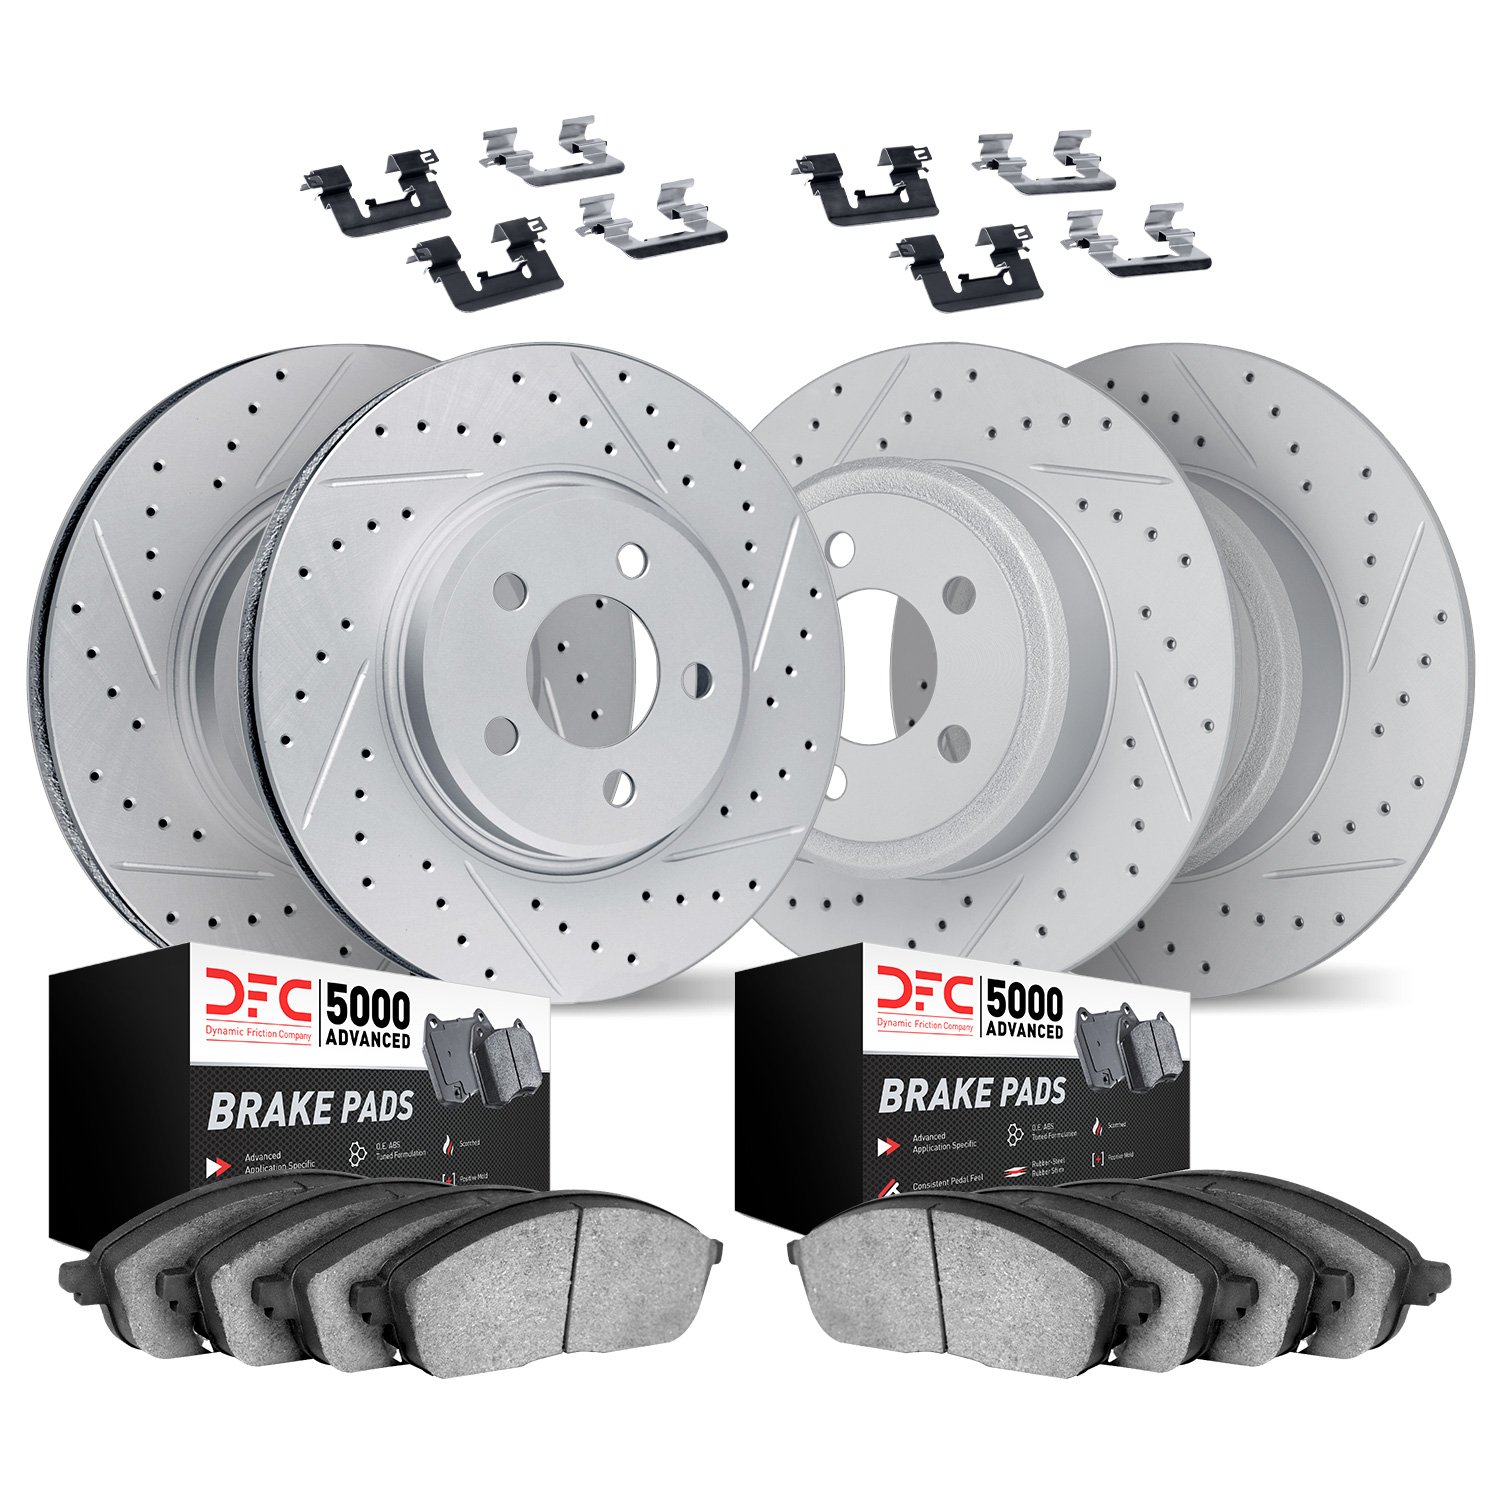 2514-59040 Geoperformance Drilled/Slotted Rotors w/5000 Advanced Brake Pads Kit & Hardware, 2015-2017 Acura/Honda, Position: Fro